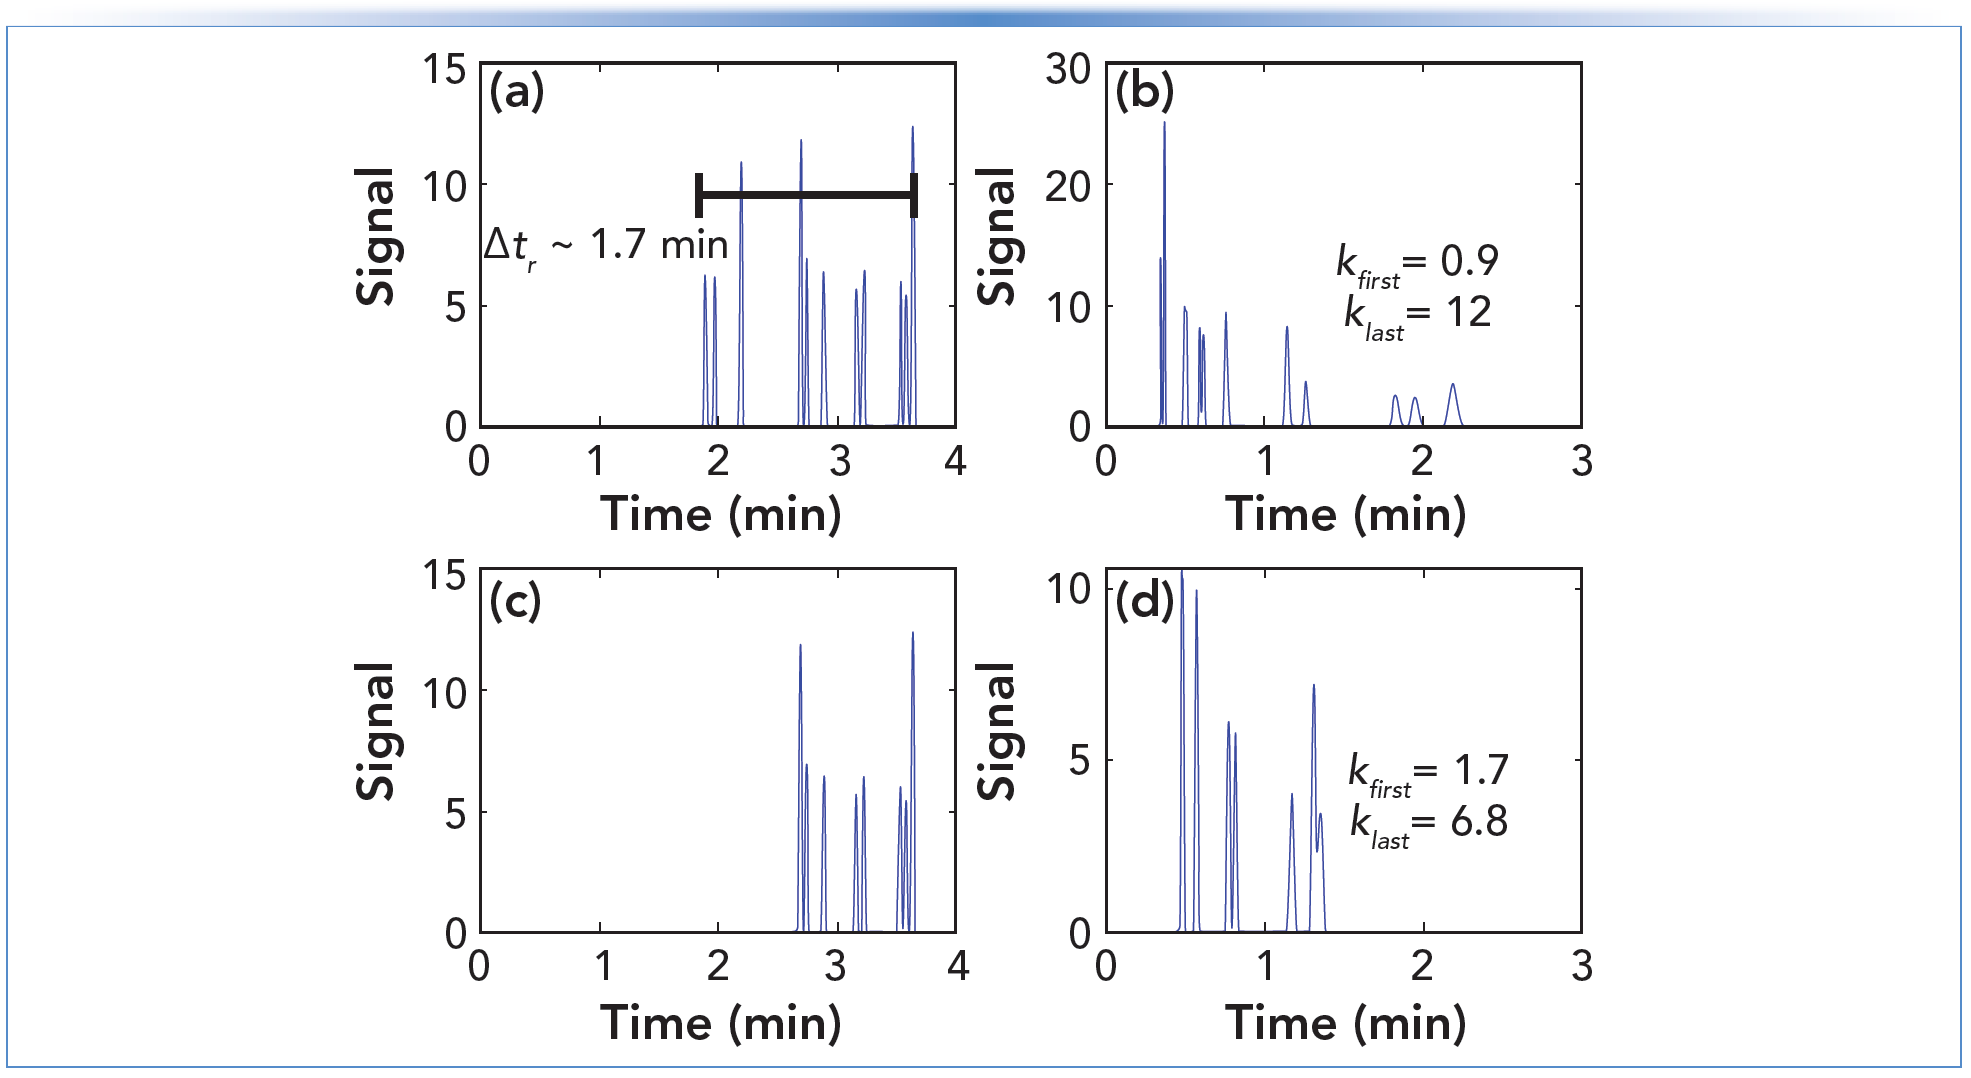 FIGURE 1: Simulated chromatograms for separations of small molecule mixtures. (a) Full mix–gradient, (b) full mix–isocratic with 48% B, (c) abbreviated mix–gradient, and (d) abbreviated mix–isocratic with 54% B. Chromatographic conditions: column: 50 mm x 2.1 mm i.d. (3.5 micron particles) C18; flow rate: 0.5 mL/min.; temperature: 40 °C. Simulations were performed using freeware (www.multidlc.org/MultiSimLC).